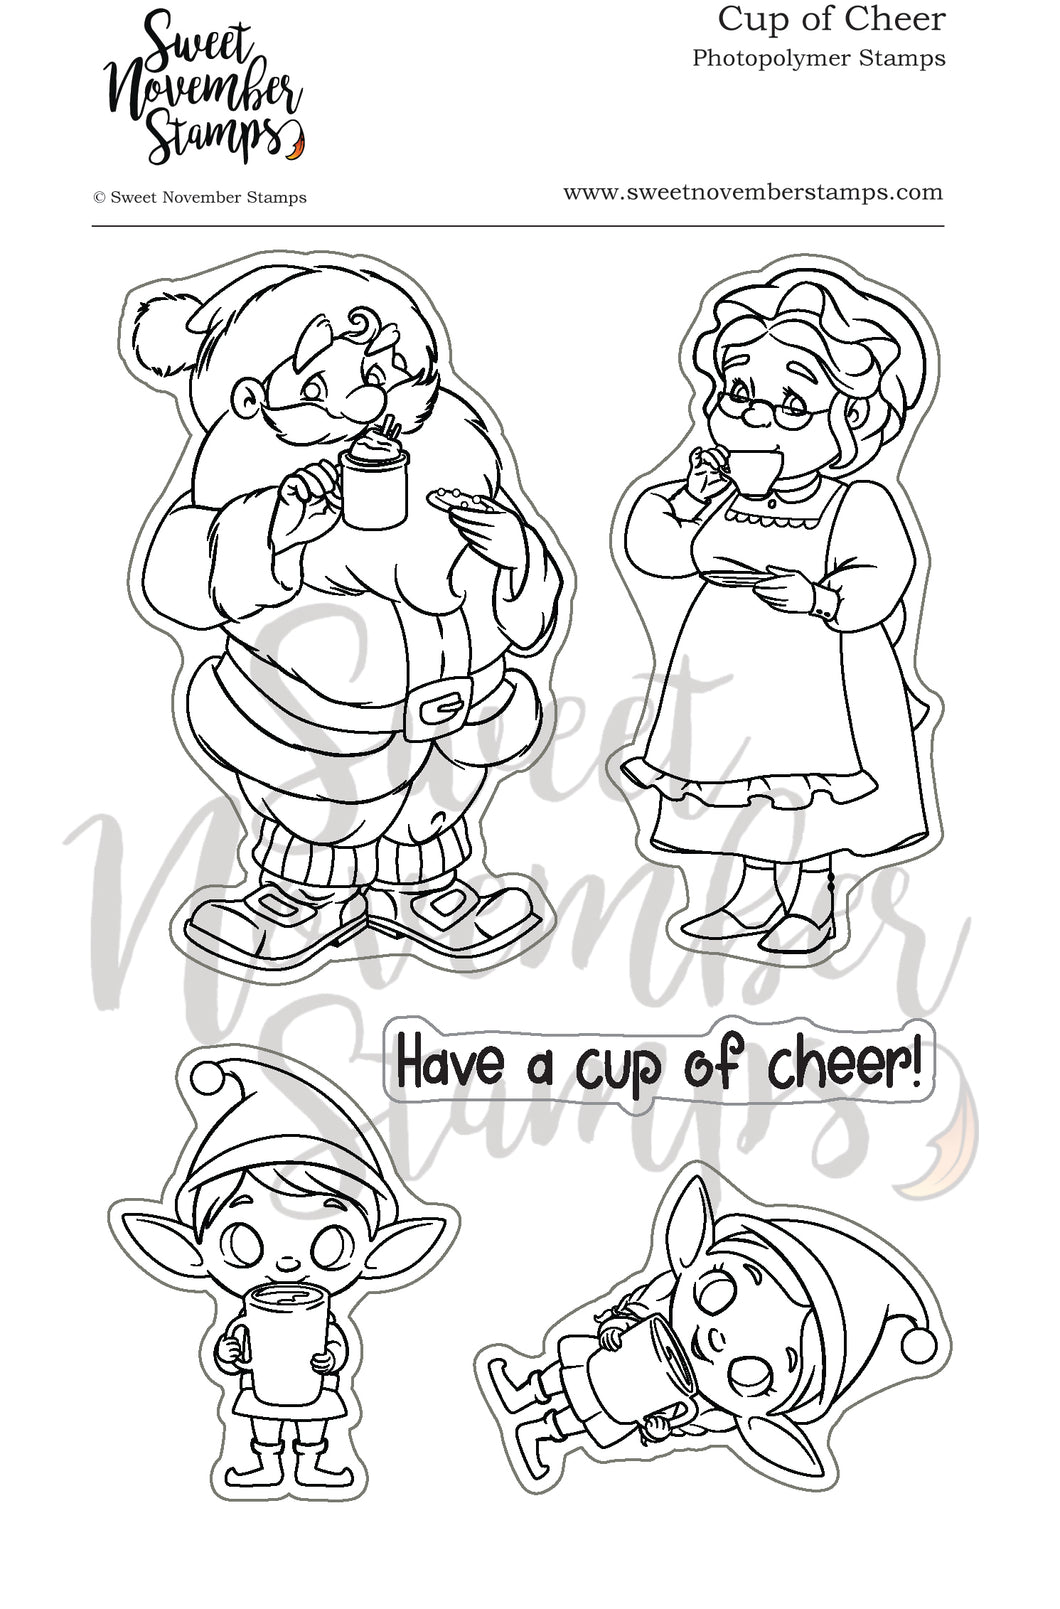 Clear Stamp Set - Cup of Cheer